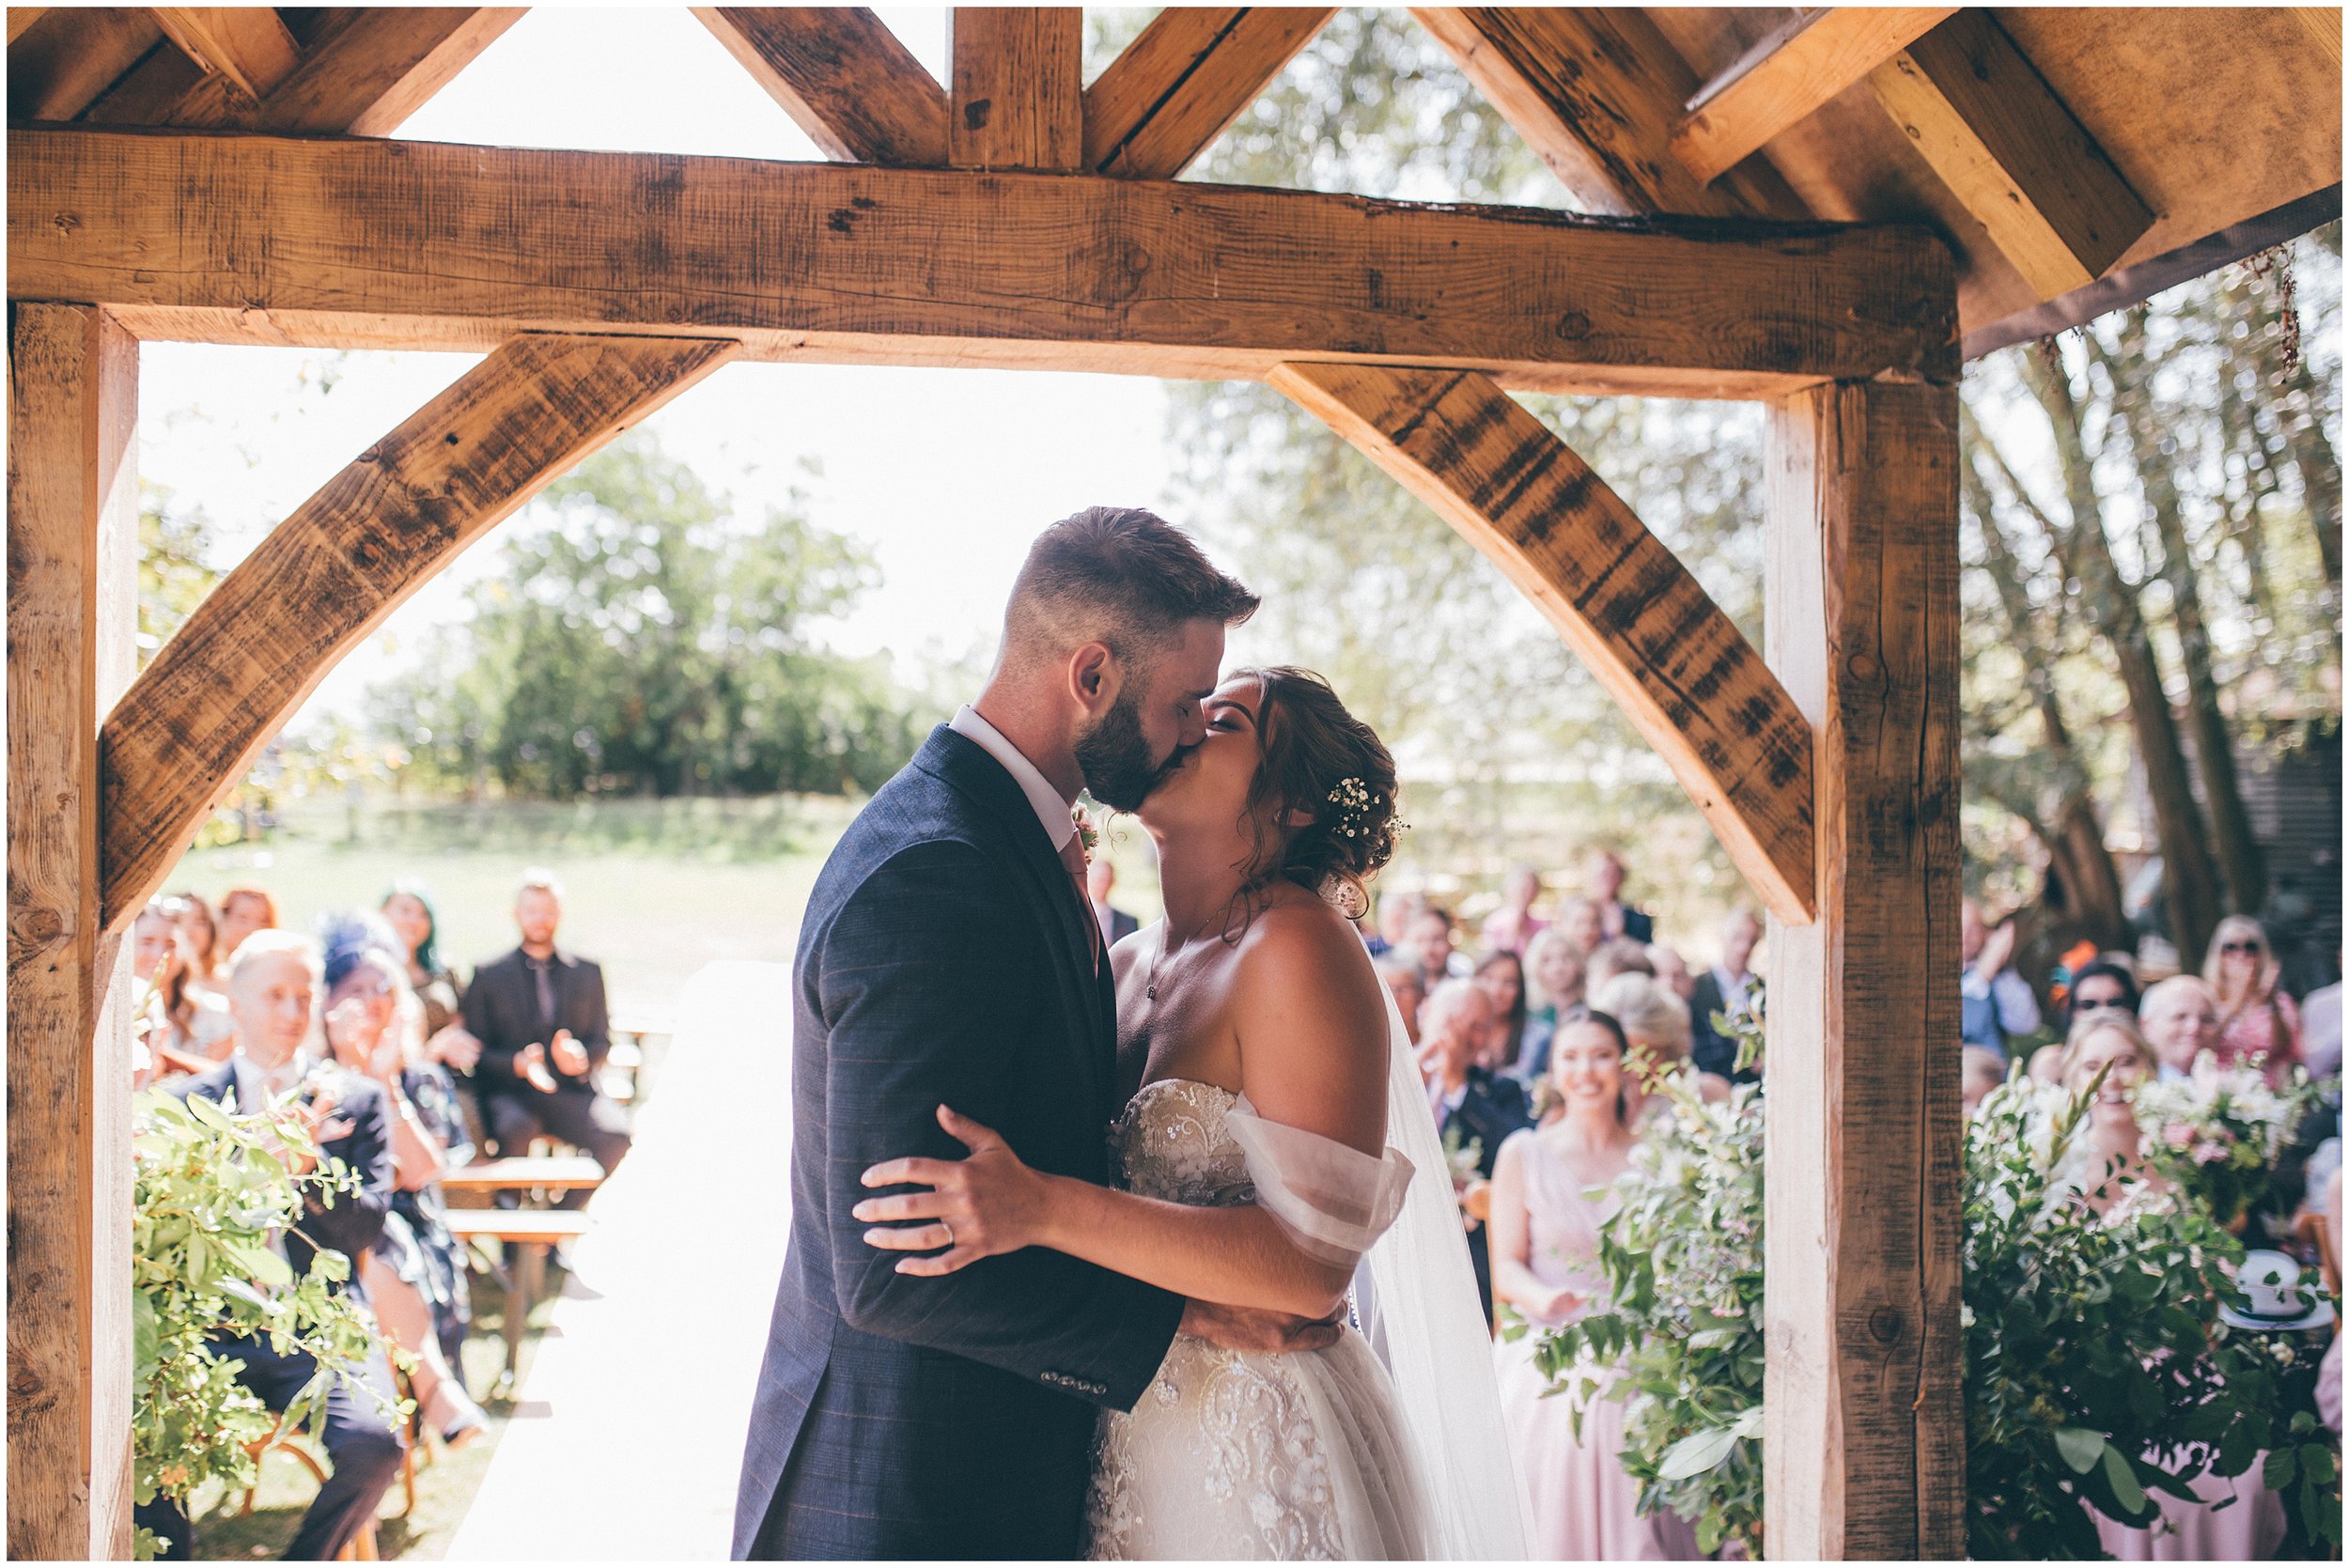 Bride and groom have their outdoor wedding ceremony at Skipbridge Country Wedding venue in Yorkshire